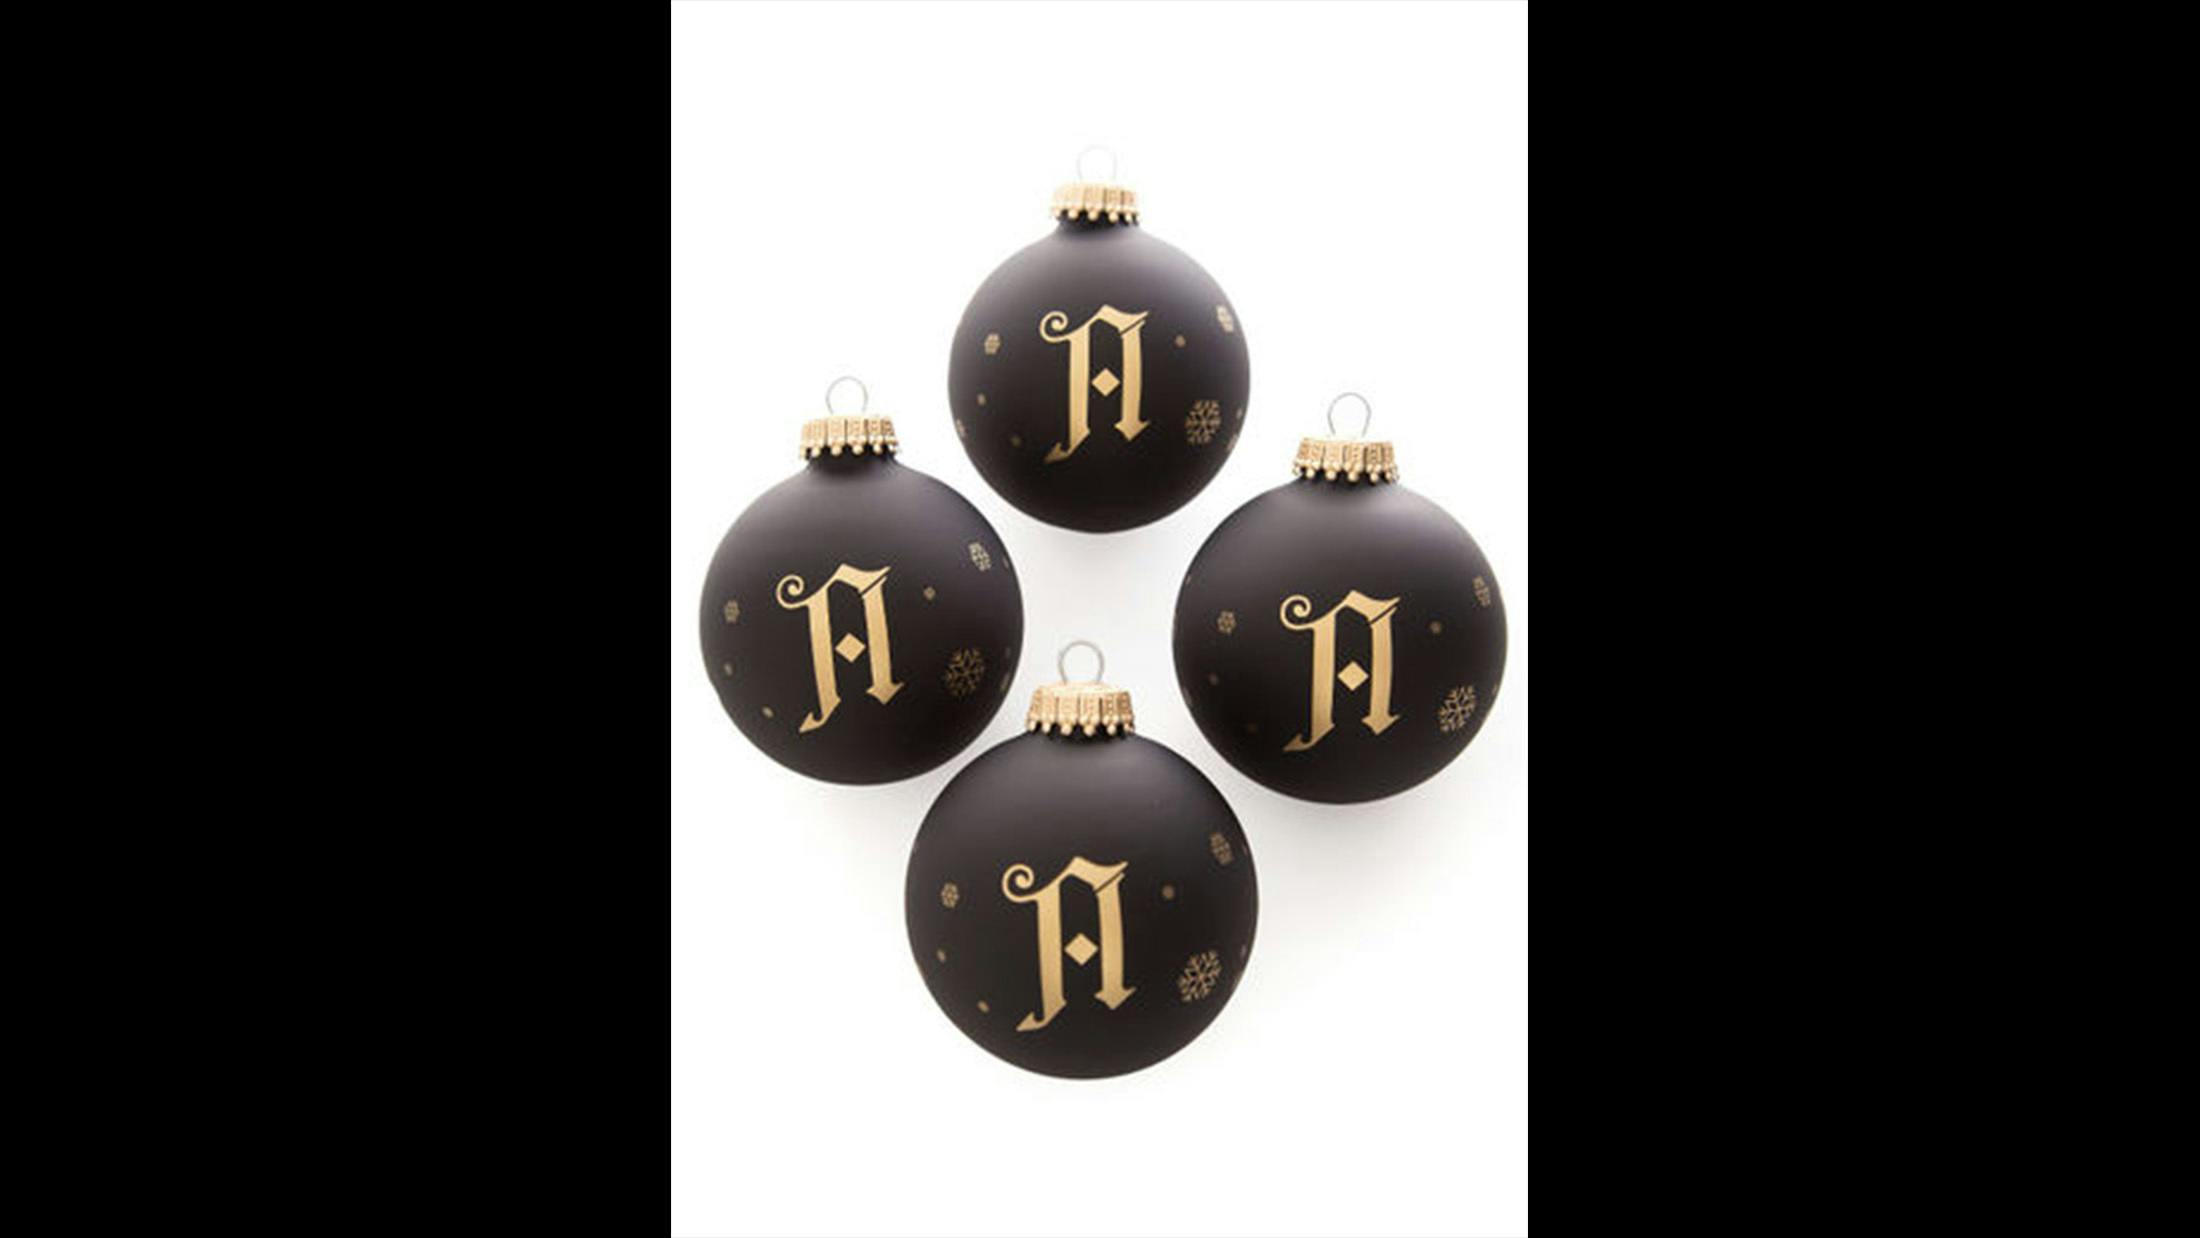 Because by now, the cat has probably pulled all your decorations off the tree or they’re it's simply looking a little dull and boring. These rad Architects baubles will brighten up your tree and then some. 

£17.99

https://www.impericon.com/uk/architects-limited-pack-of-4-xmas-ball-set.html